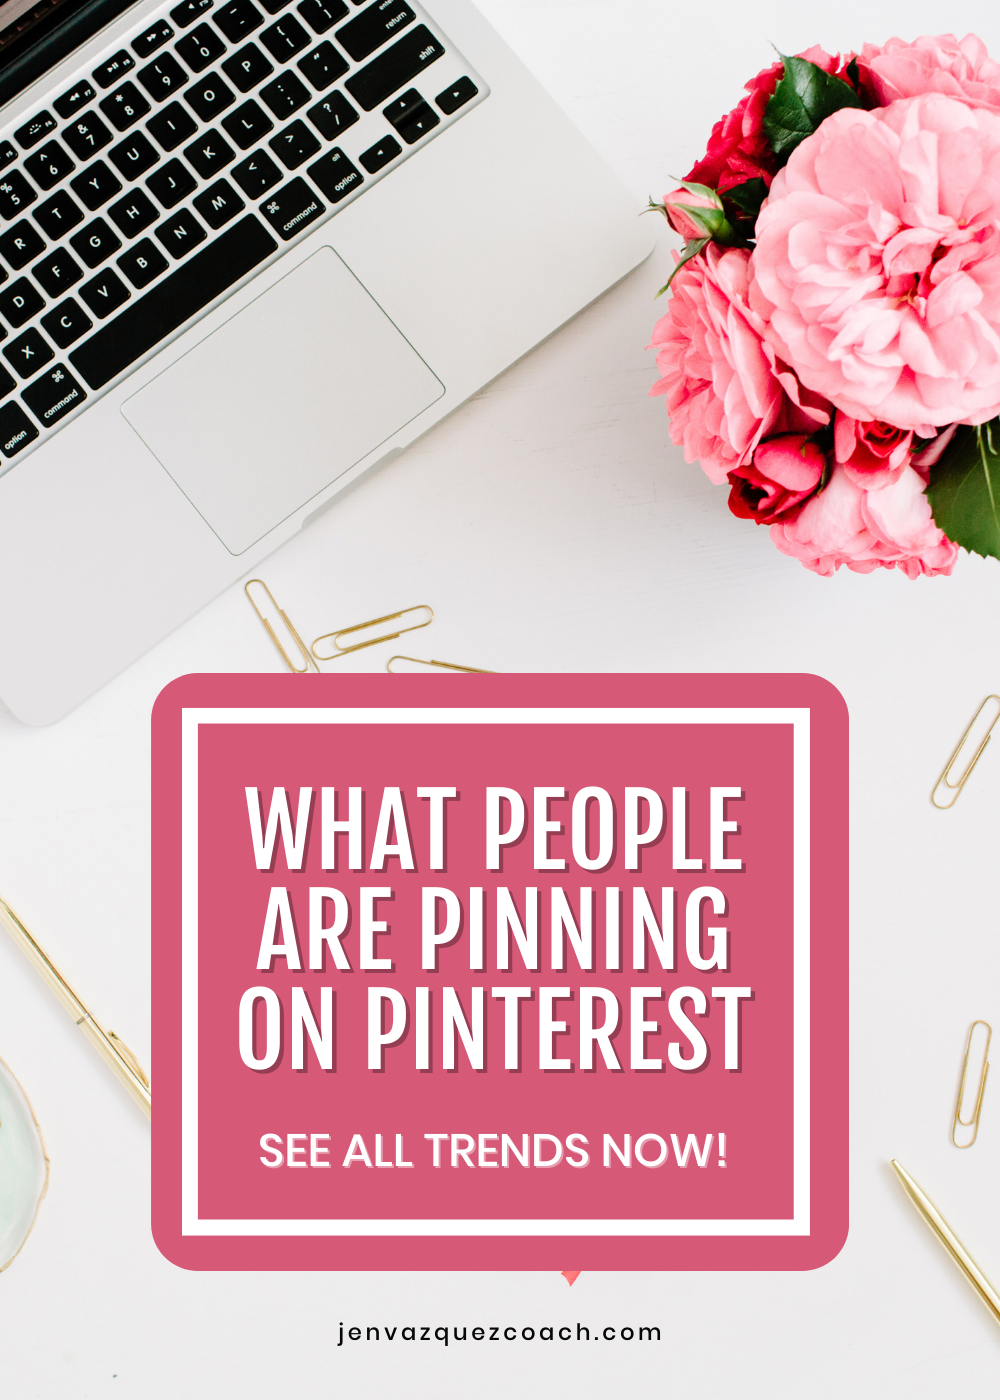 What's Trending Now on Pinterest | Pinterest Predicts Weekly 11-4-22